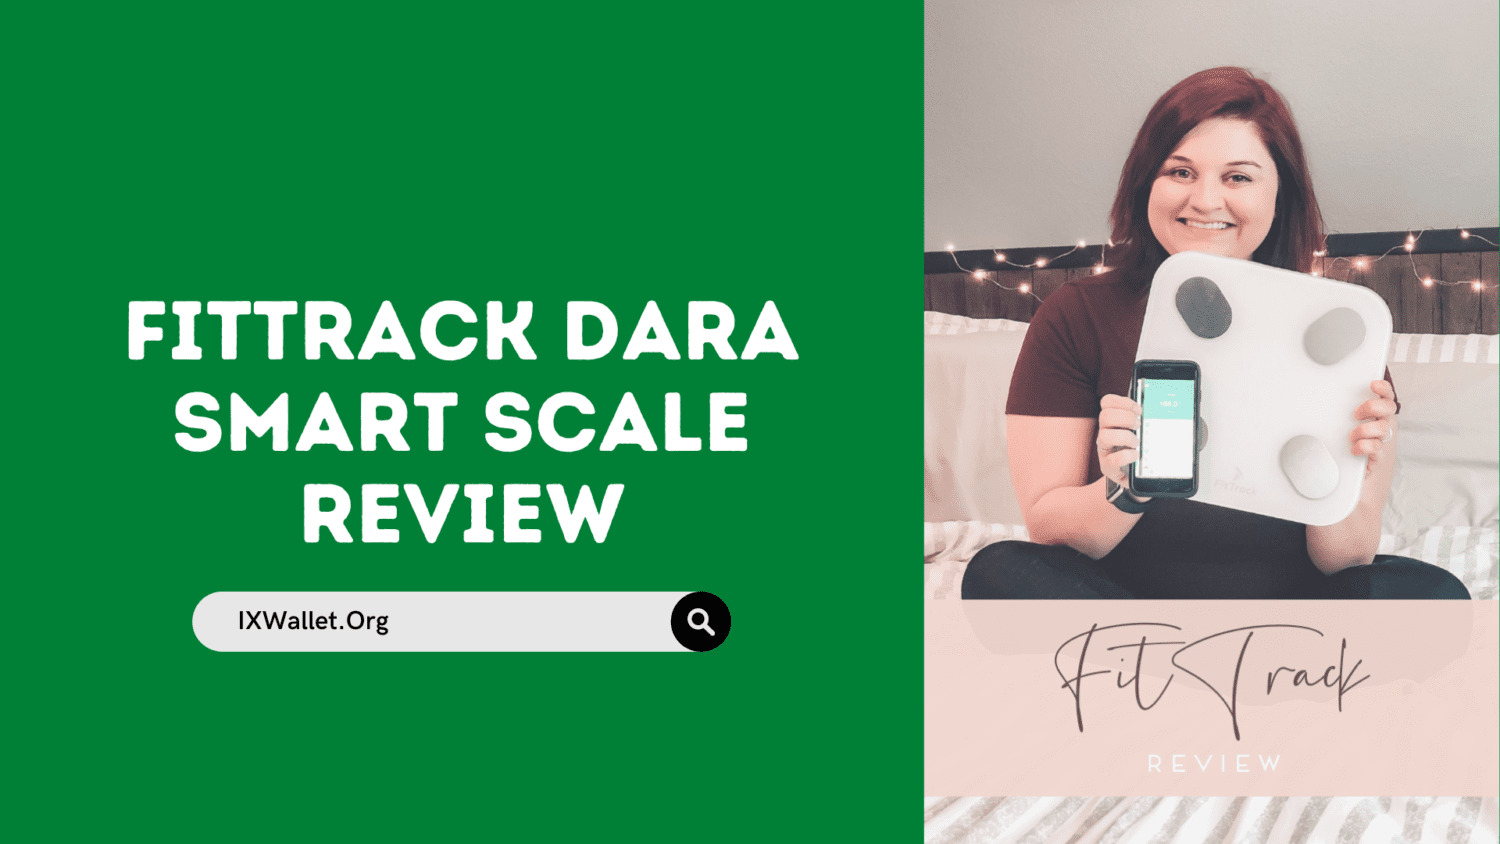 FitTrack Dara Smart Scale Review: What You Need To Know!